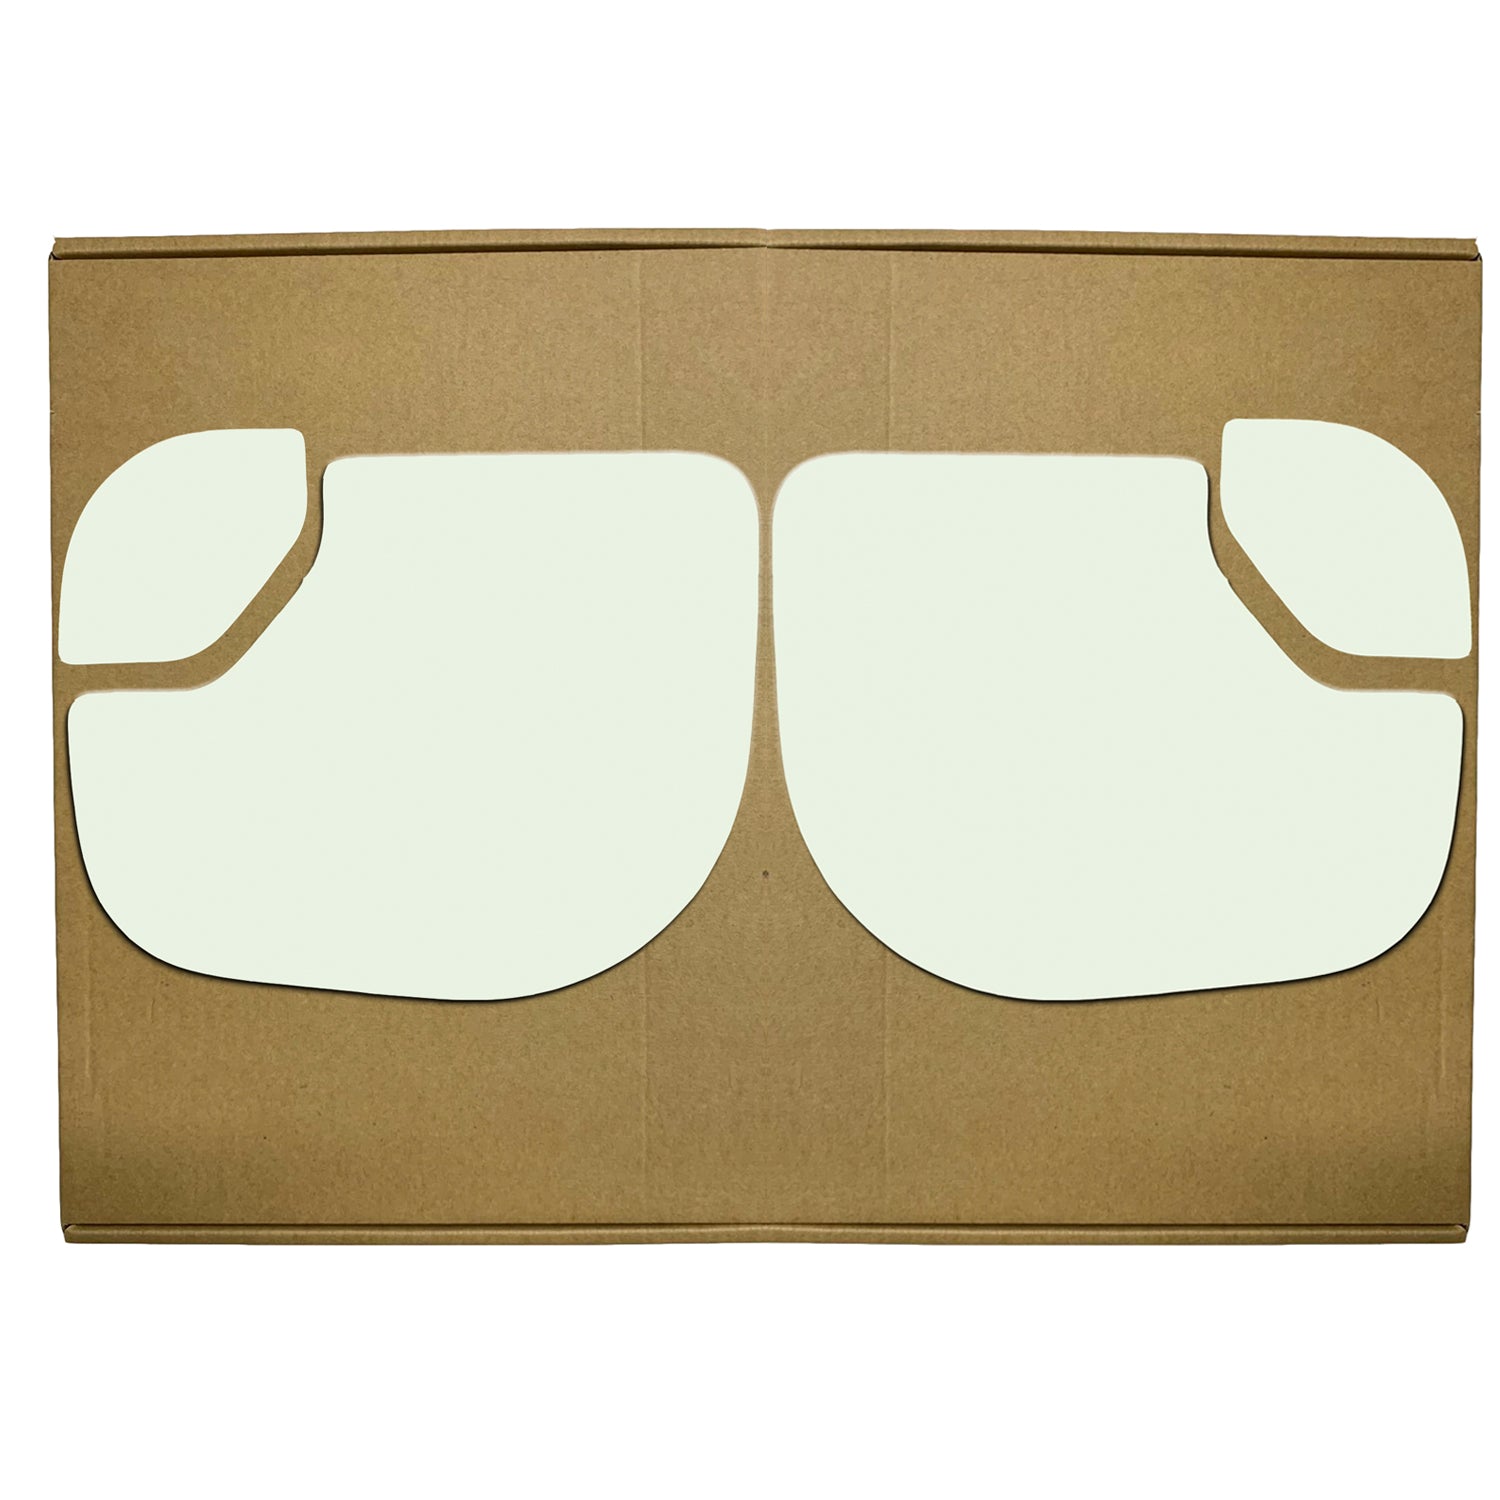 WLLW a pair of Mirror Glass Replace for 2015-2021 Ford 2017-2022 Nissan Titan/2016-2019 Nissan Titan XD, Driver Left Side LH/Passenger Right Side RH/The Both Sides Upper&Lower Flat Convex D-0072